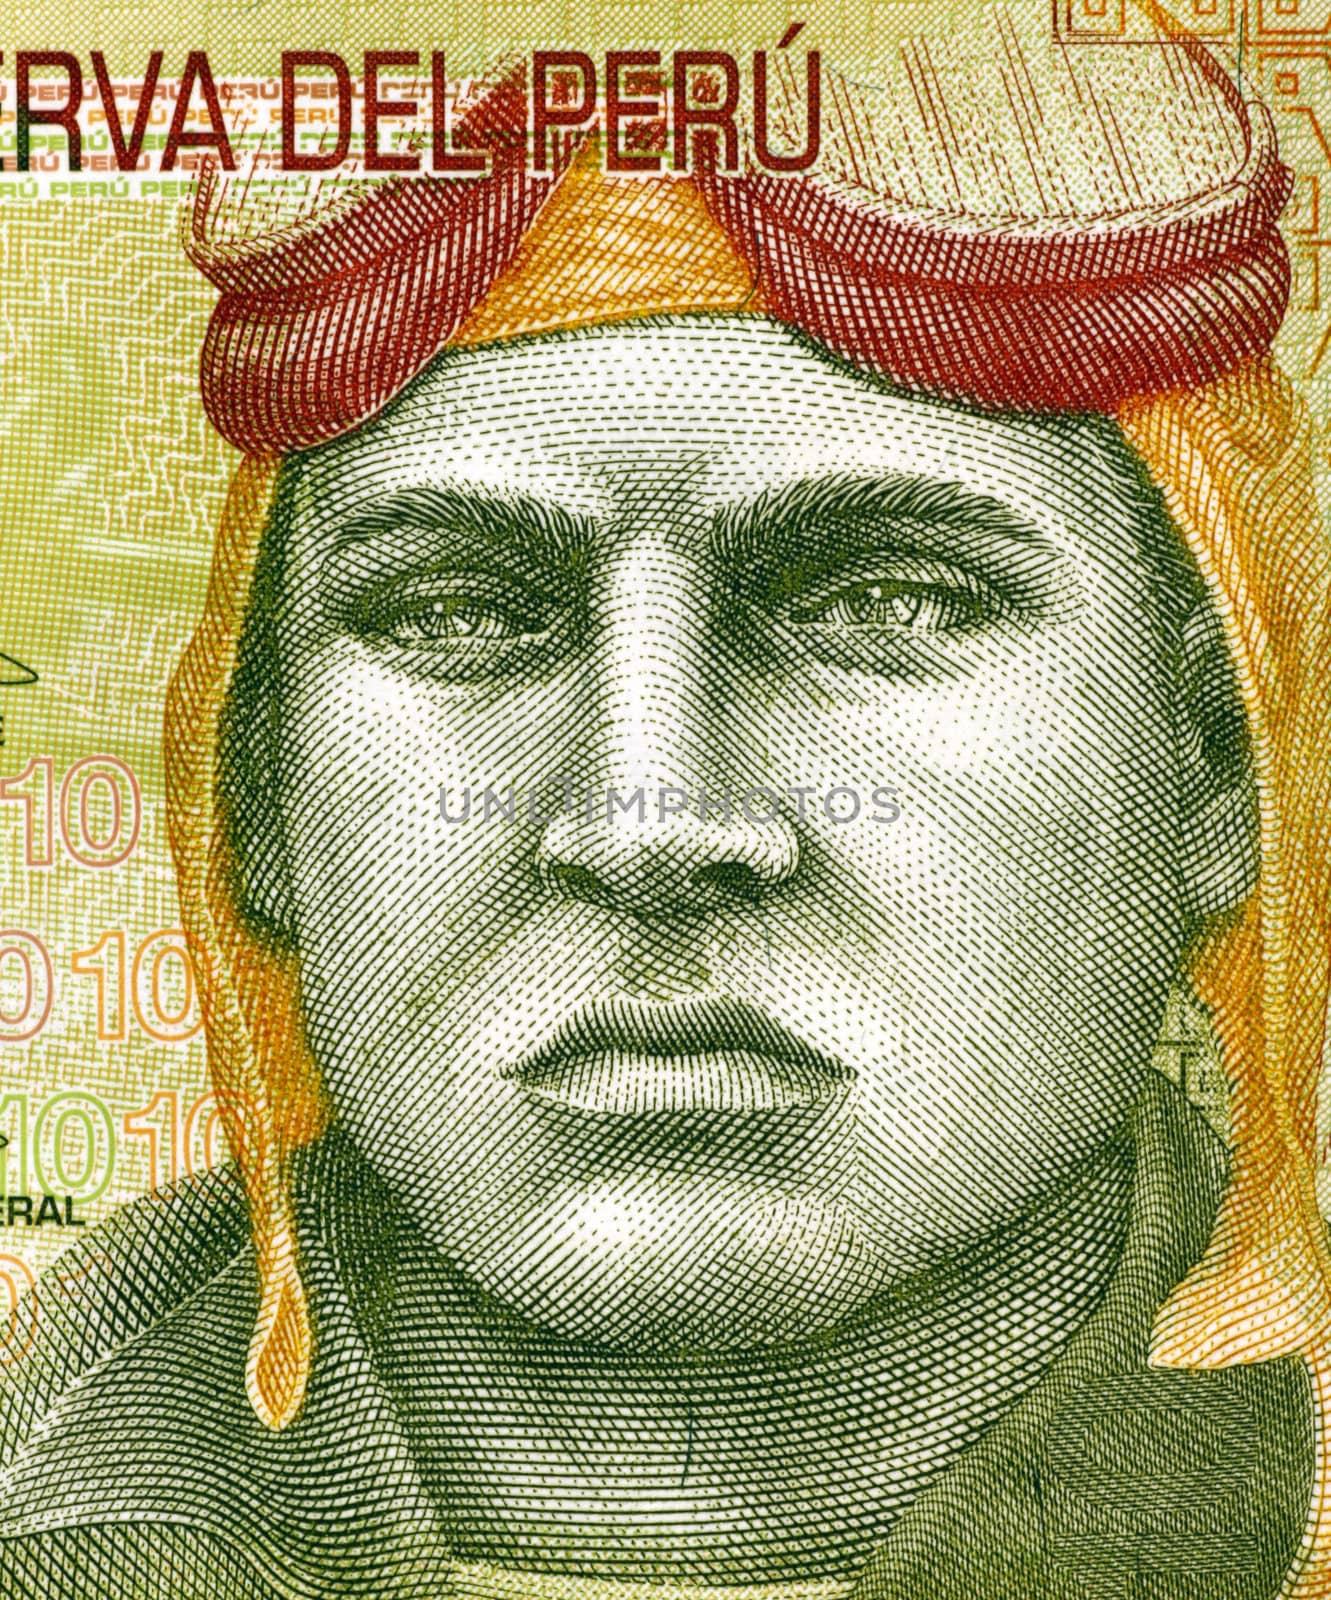 Jose Quinones Gonzales (1914-1941) on 10 Nuevos Soles 2009 Banknote from Peru. Peruvian military aviator and national aviation hero.